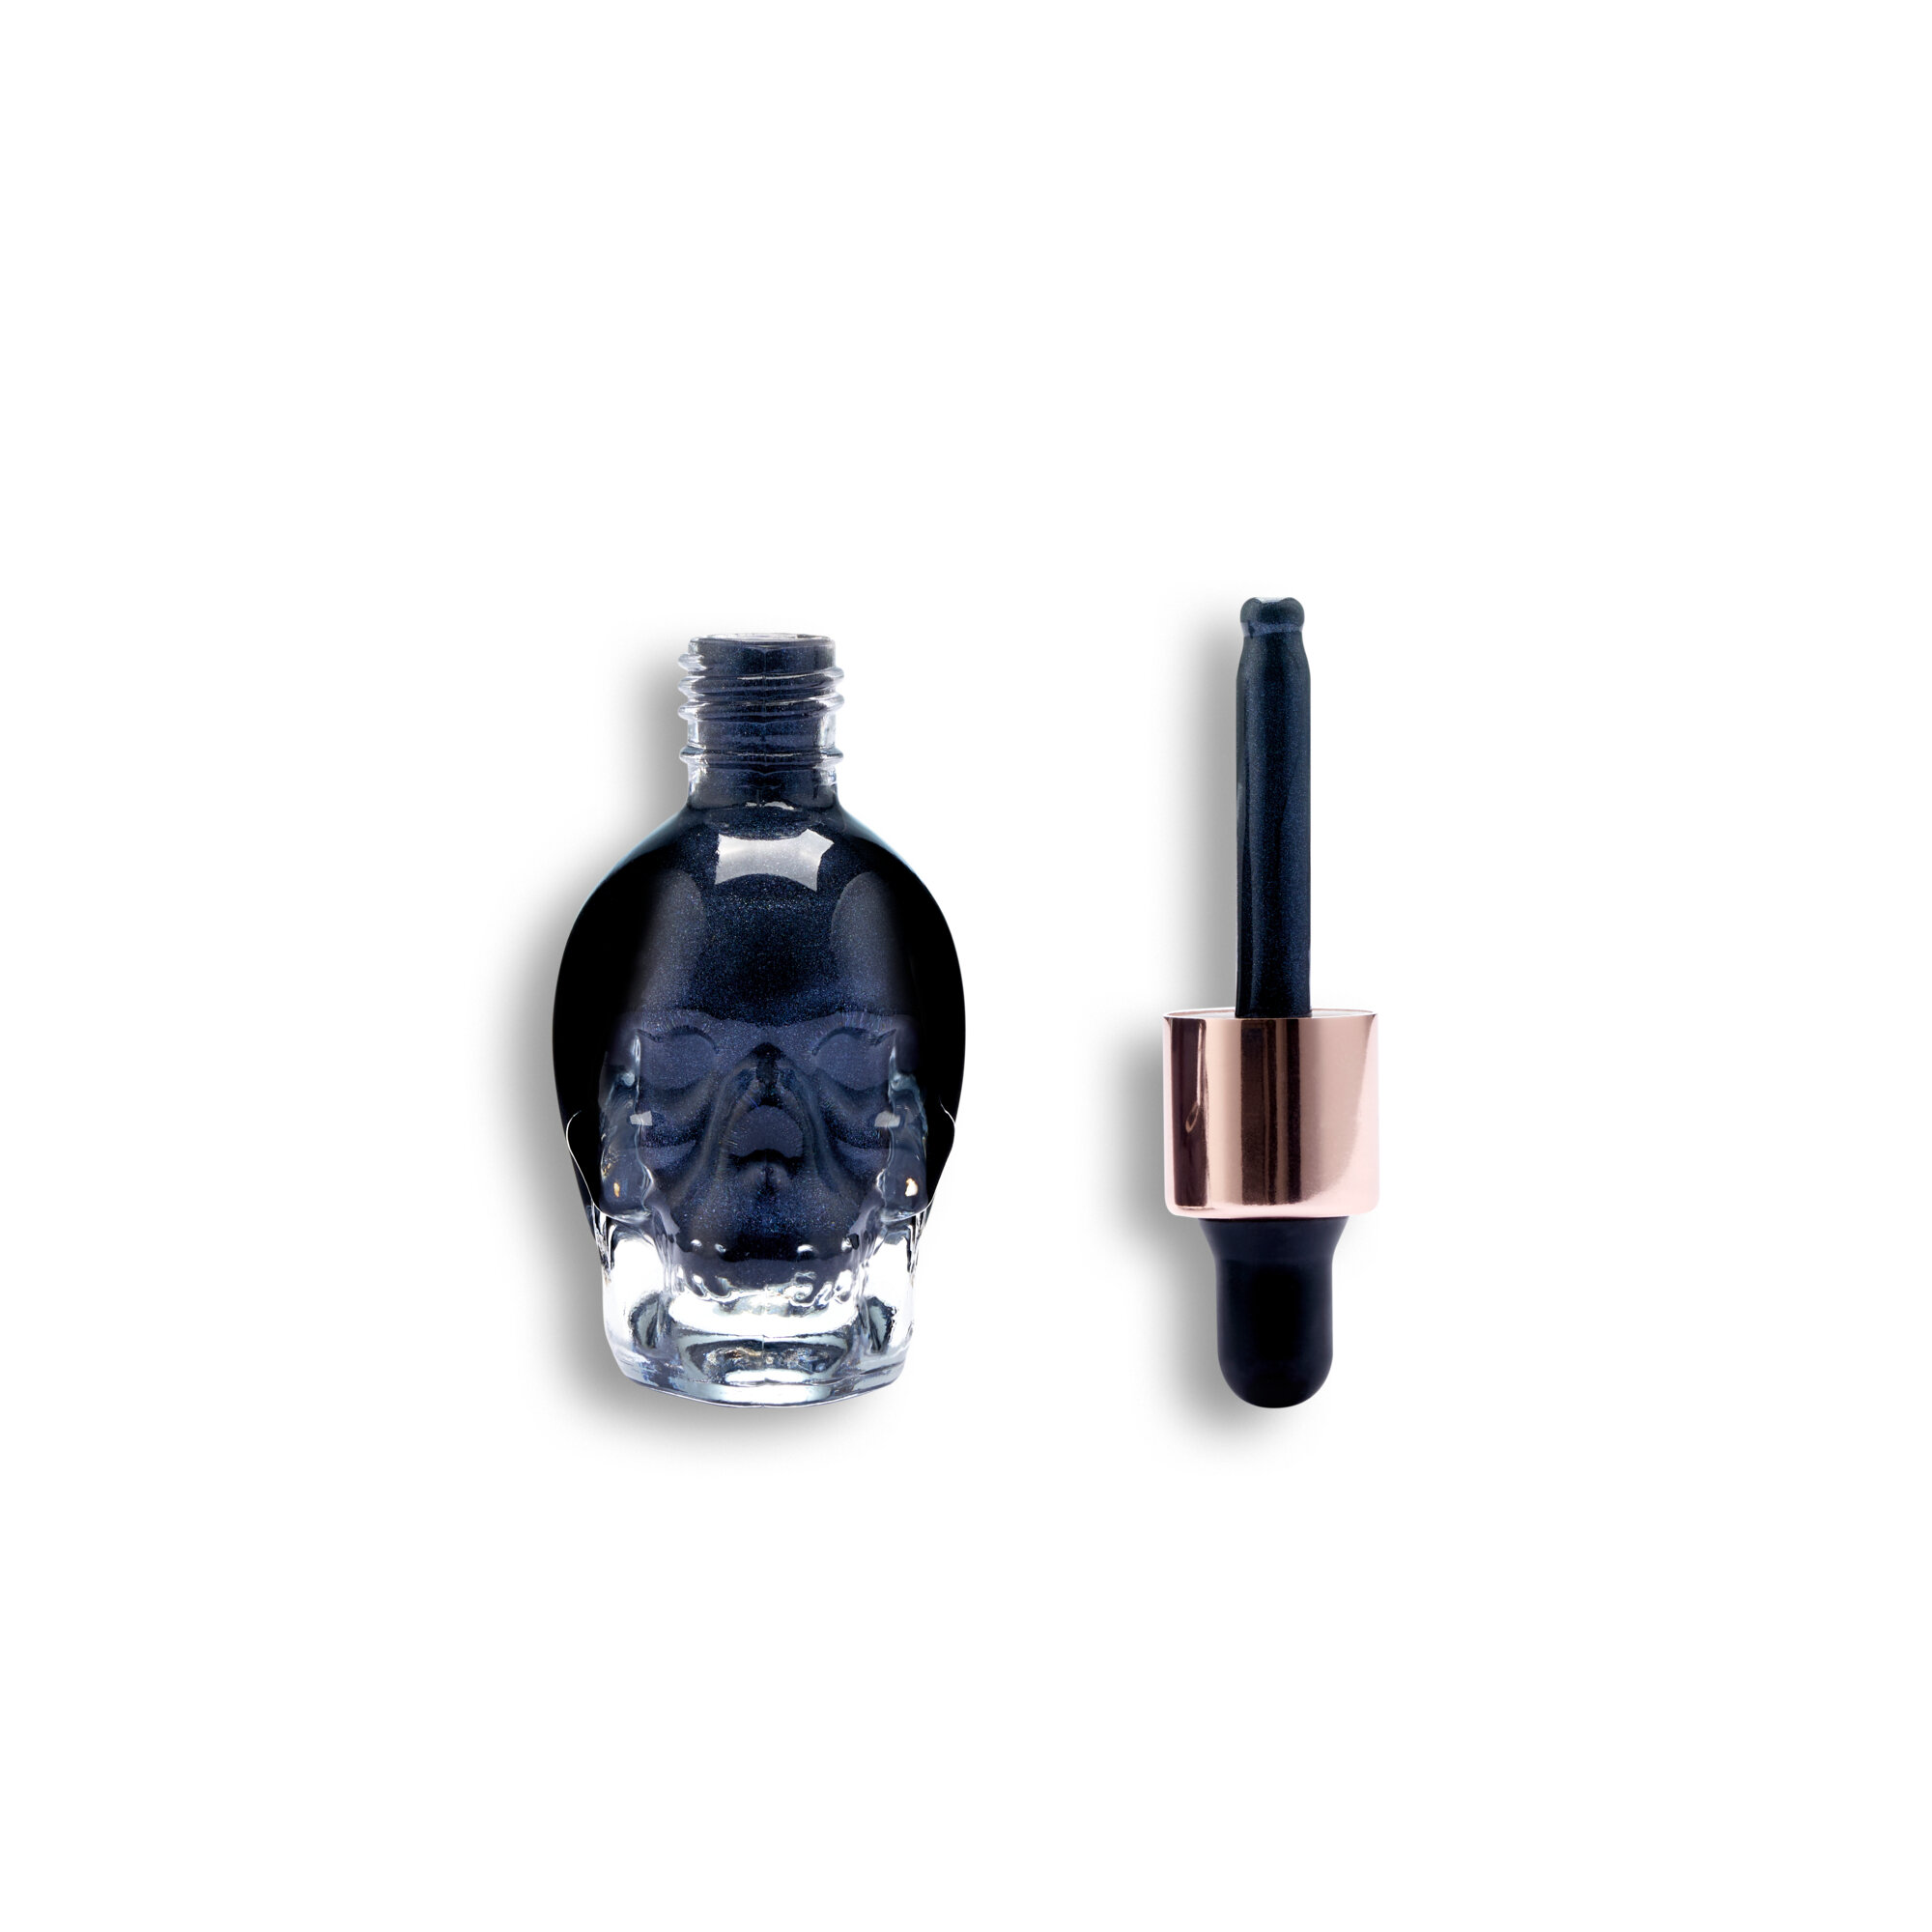 Makeup Revolution Halloween Skull Highlighter Witches Potion